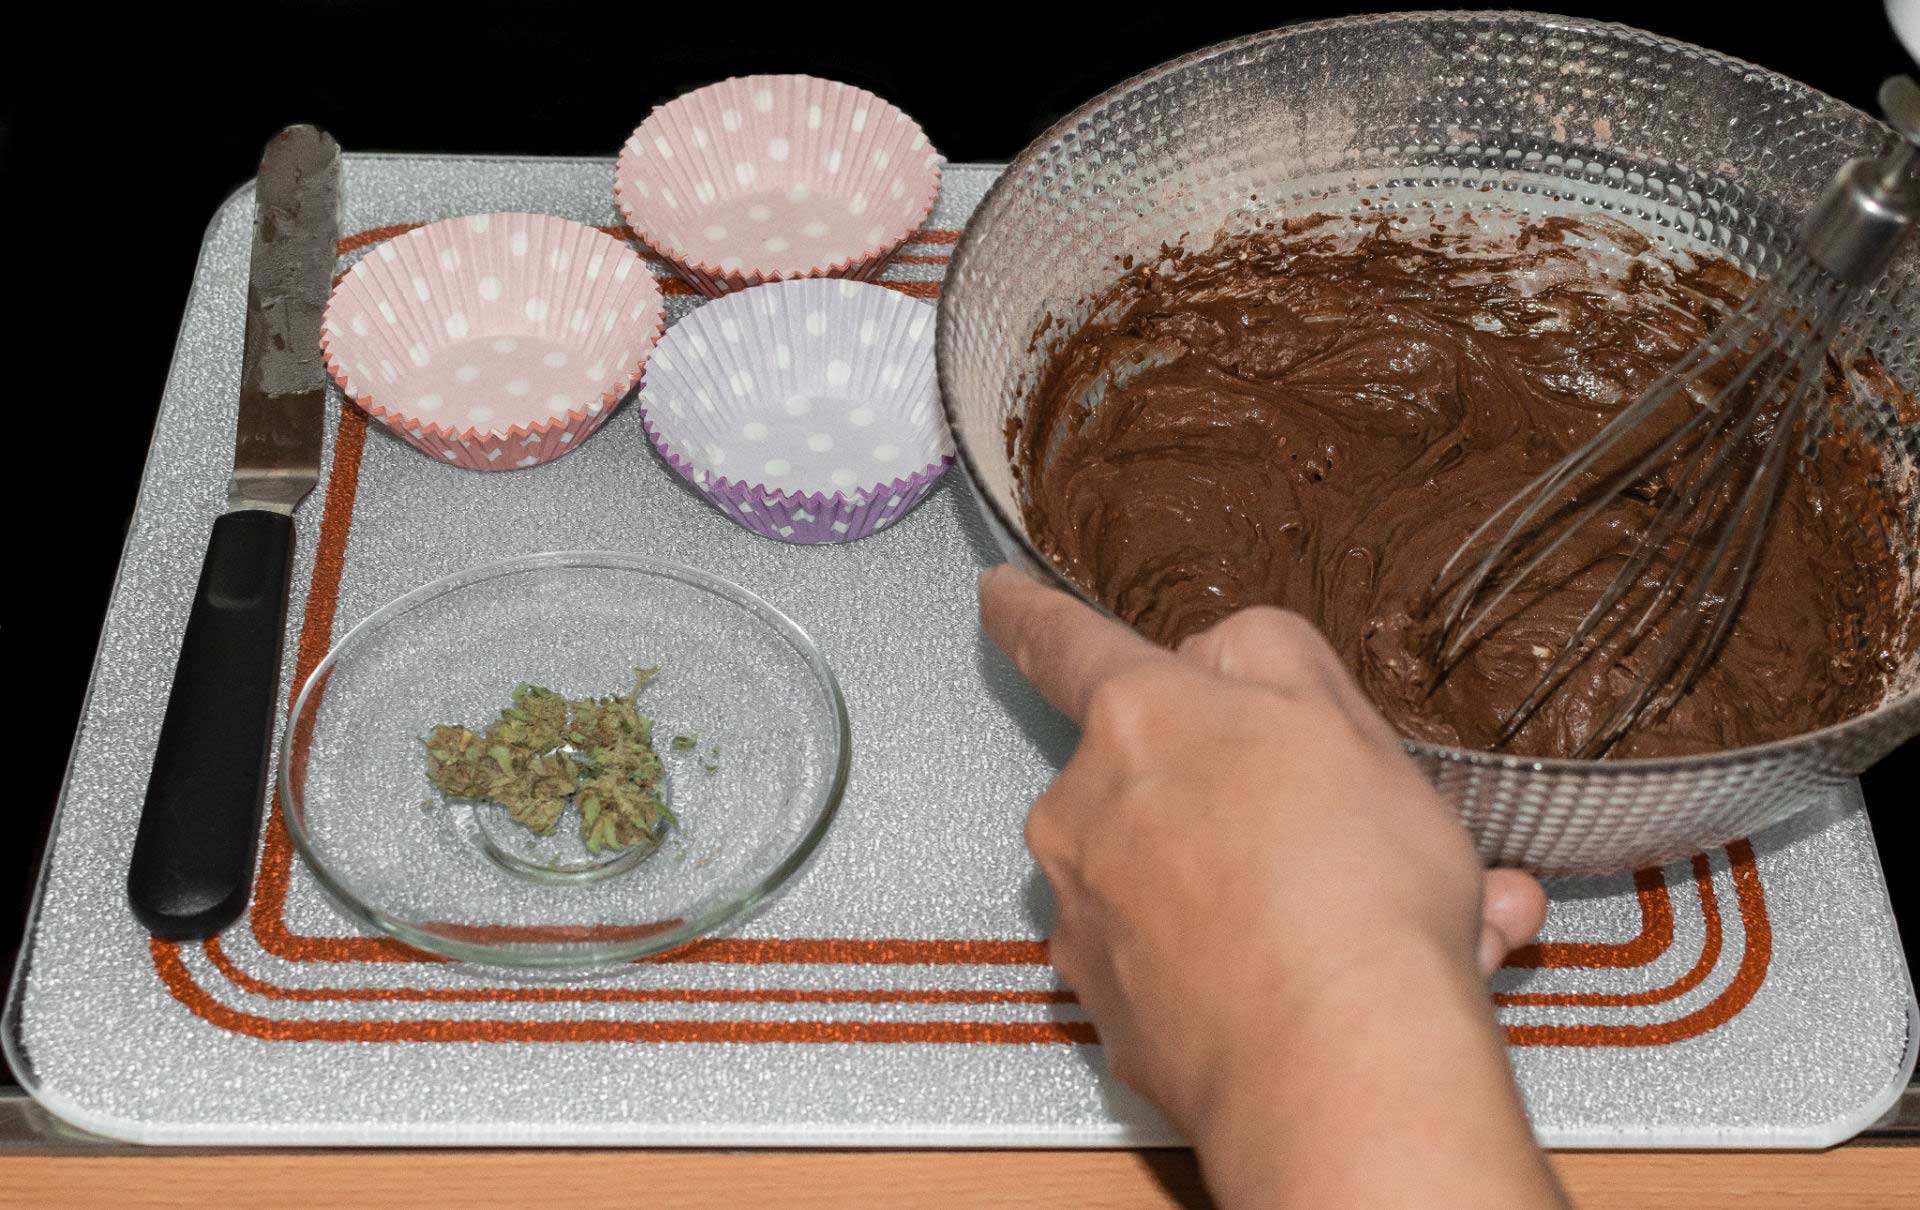 Making edibles, with cannabis shake in a small dish next to a mixing bowl with brownie batter.